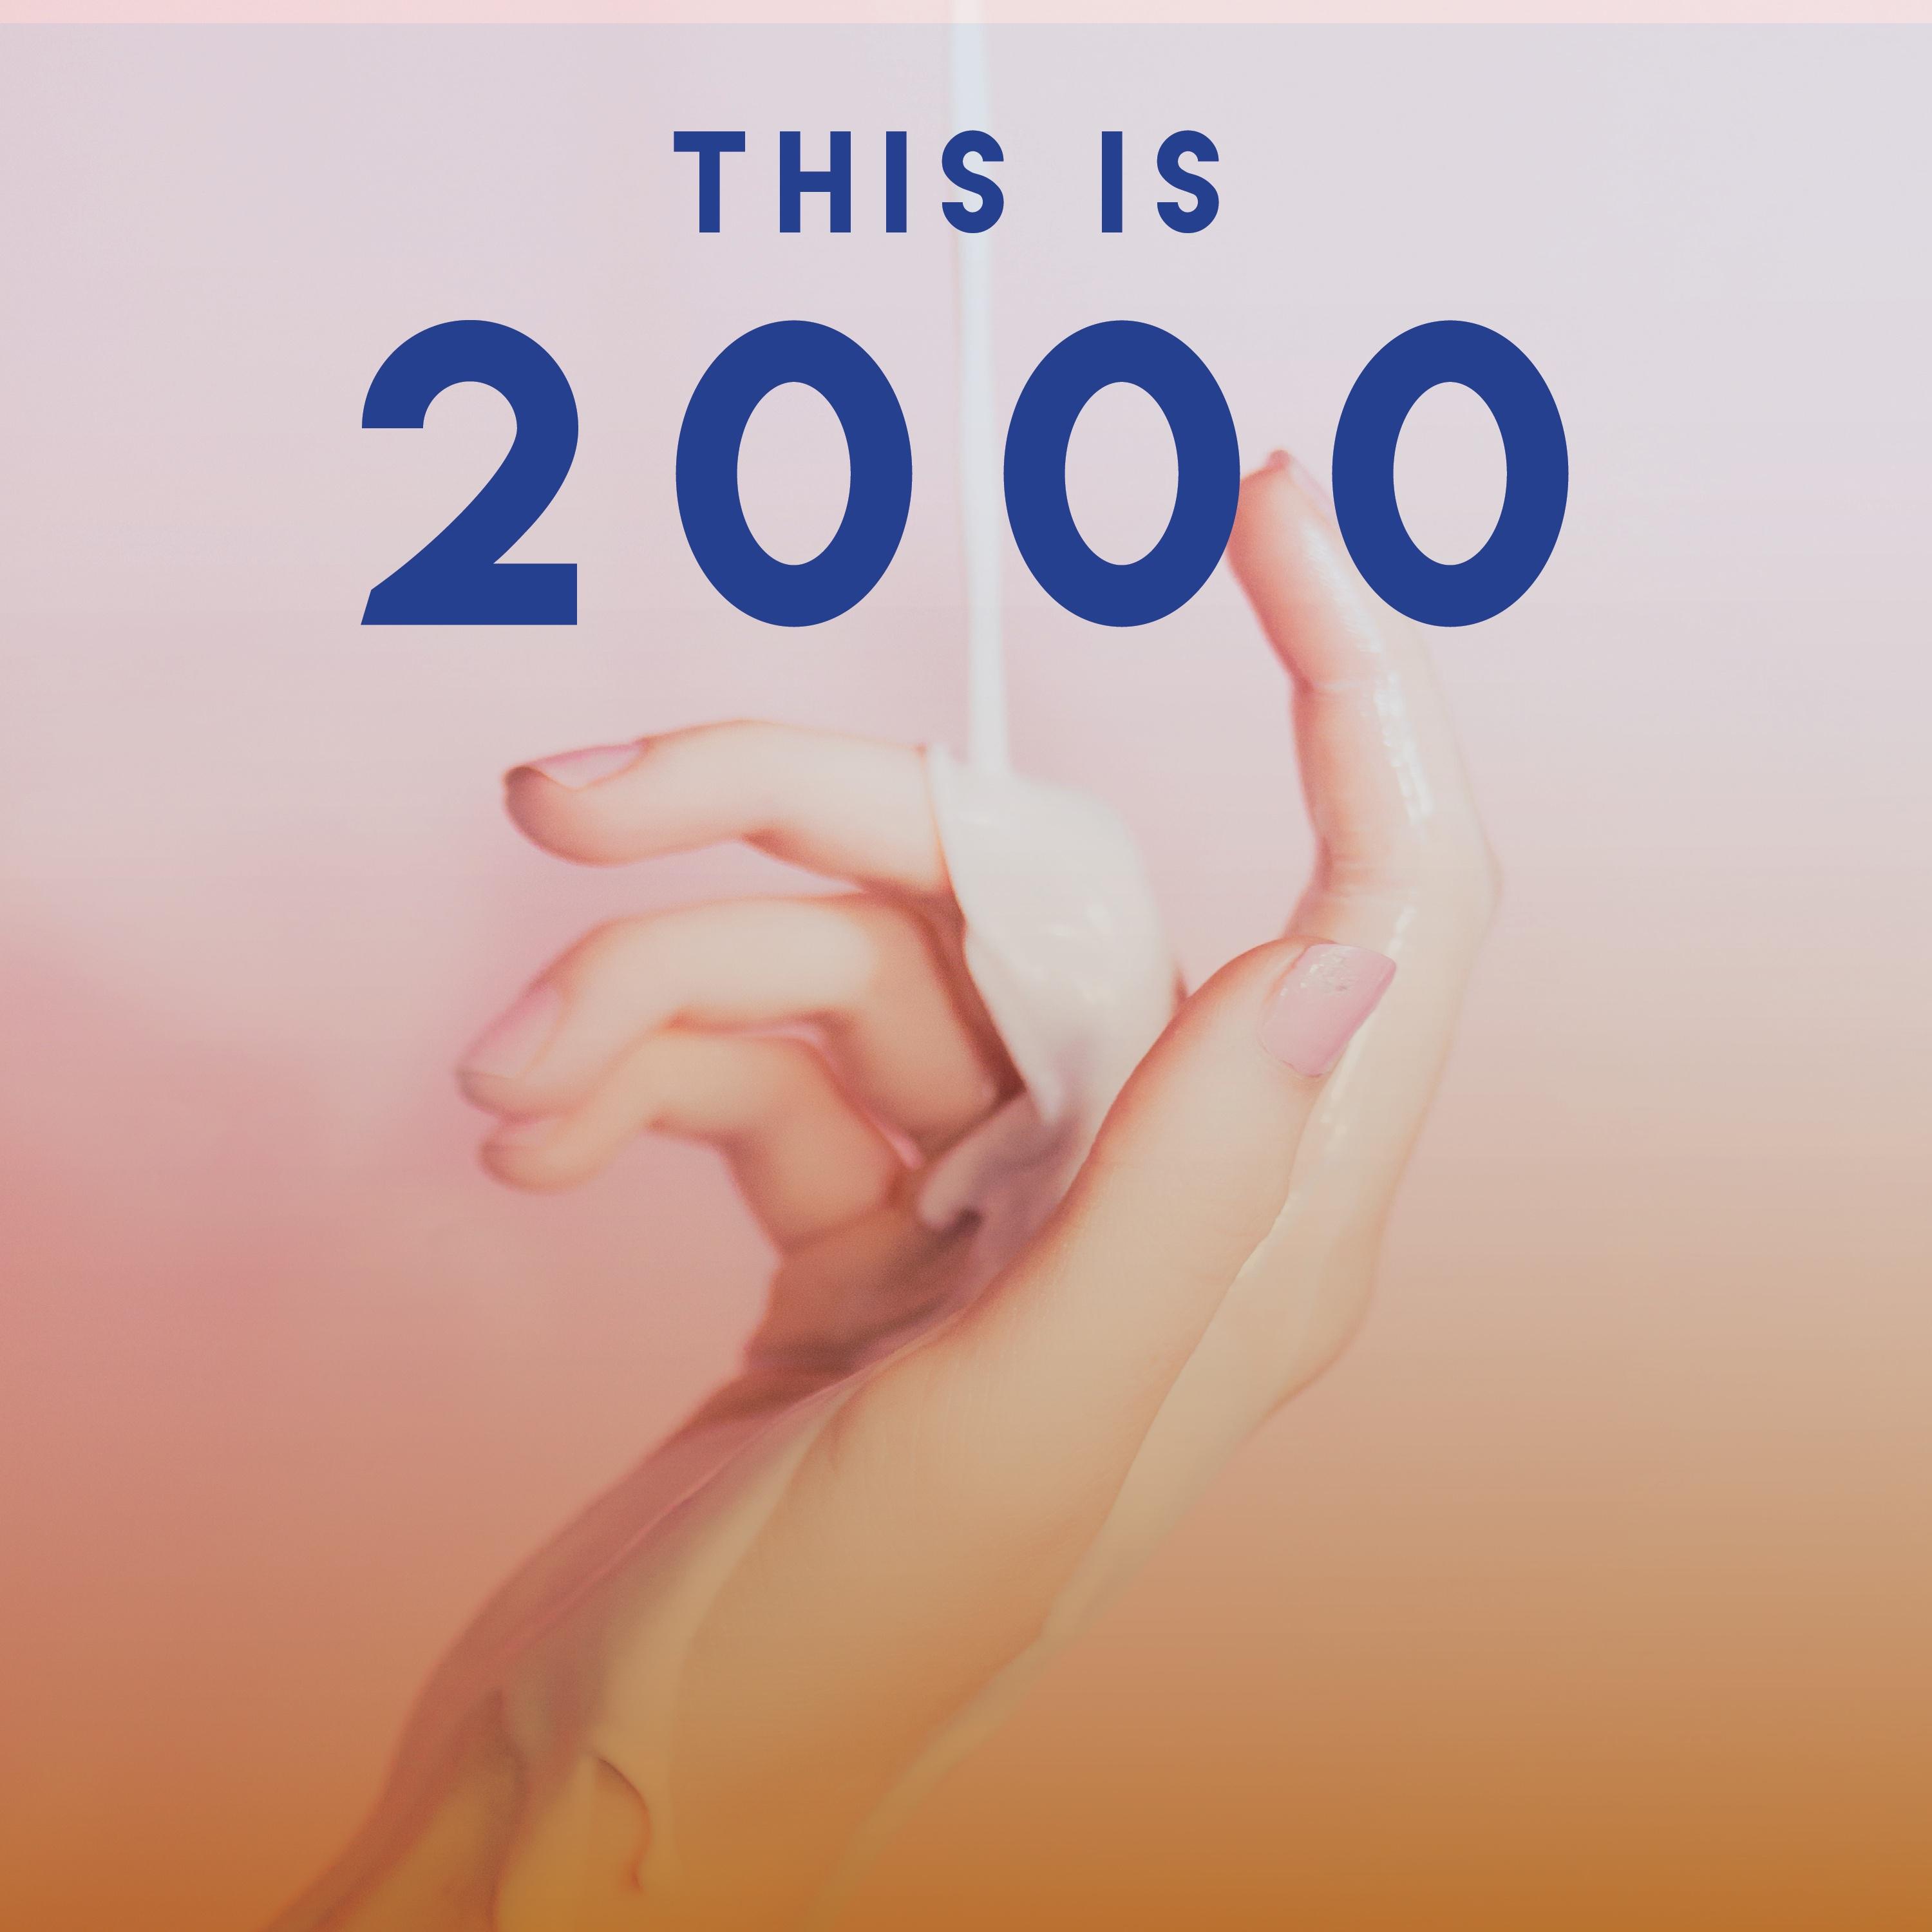 This is 2000